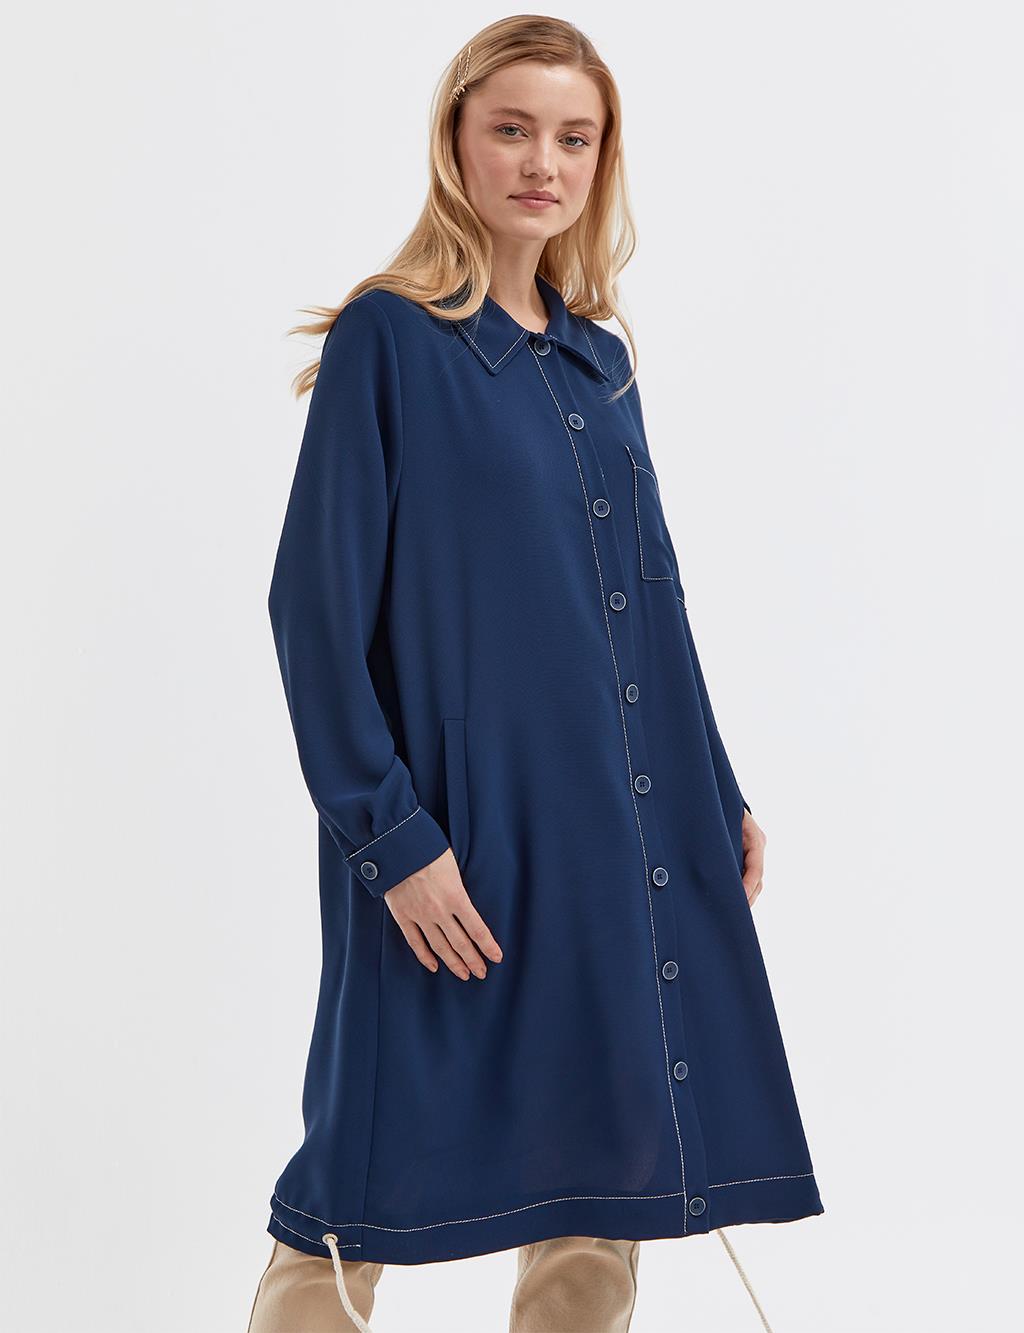 Contrast Stitched Wear & Go Navy